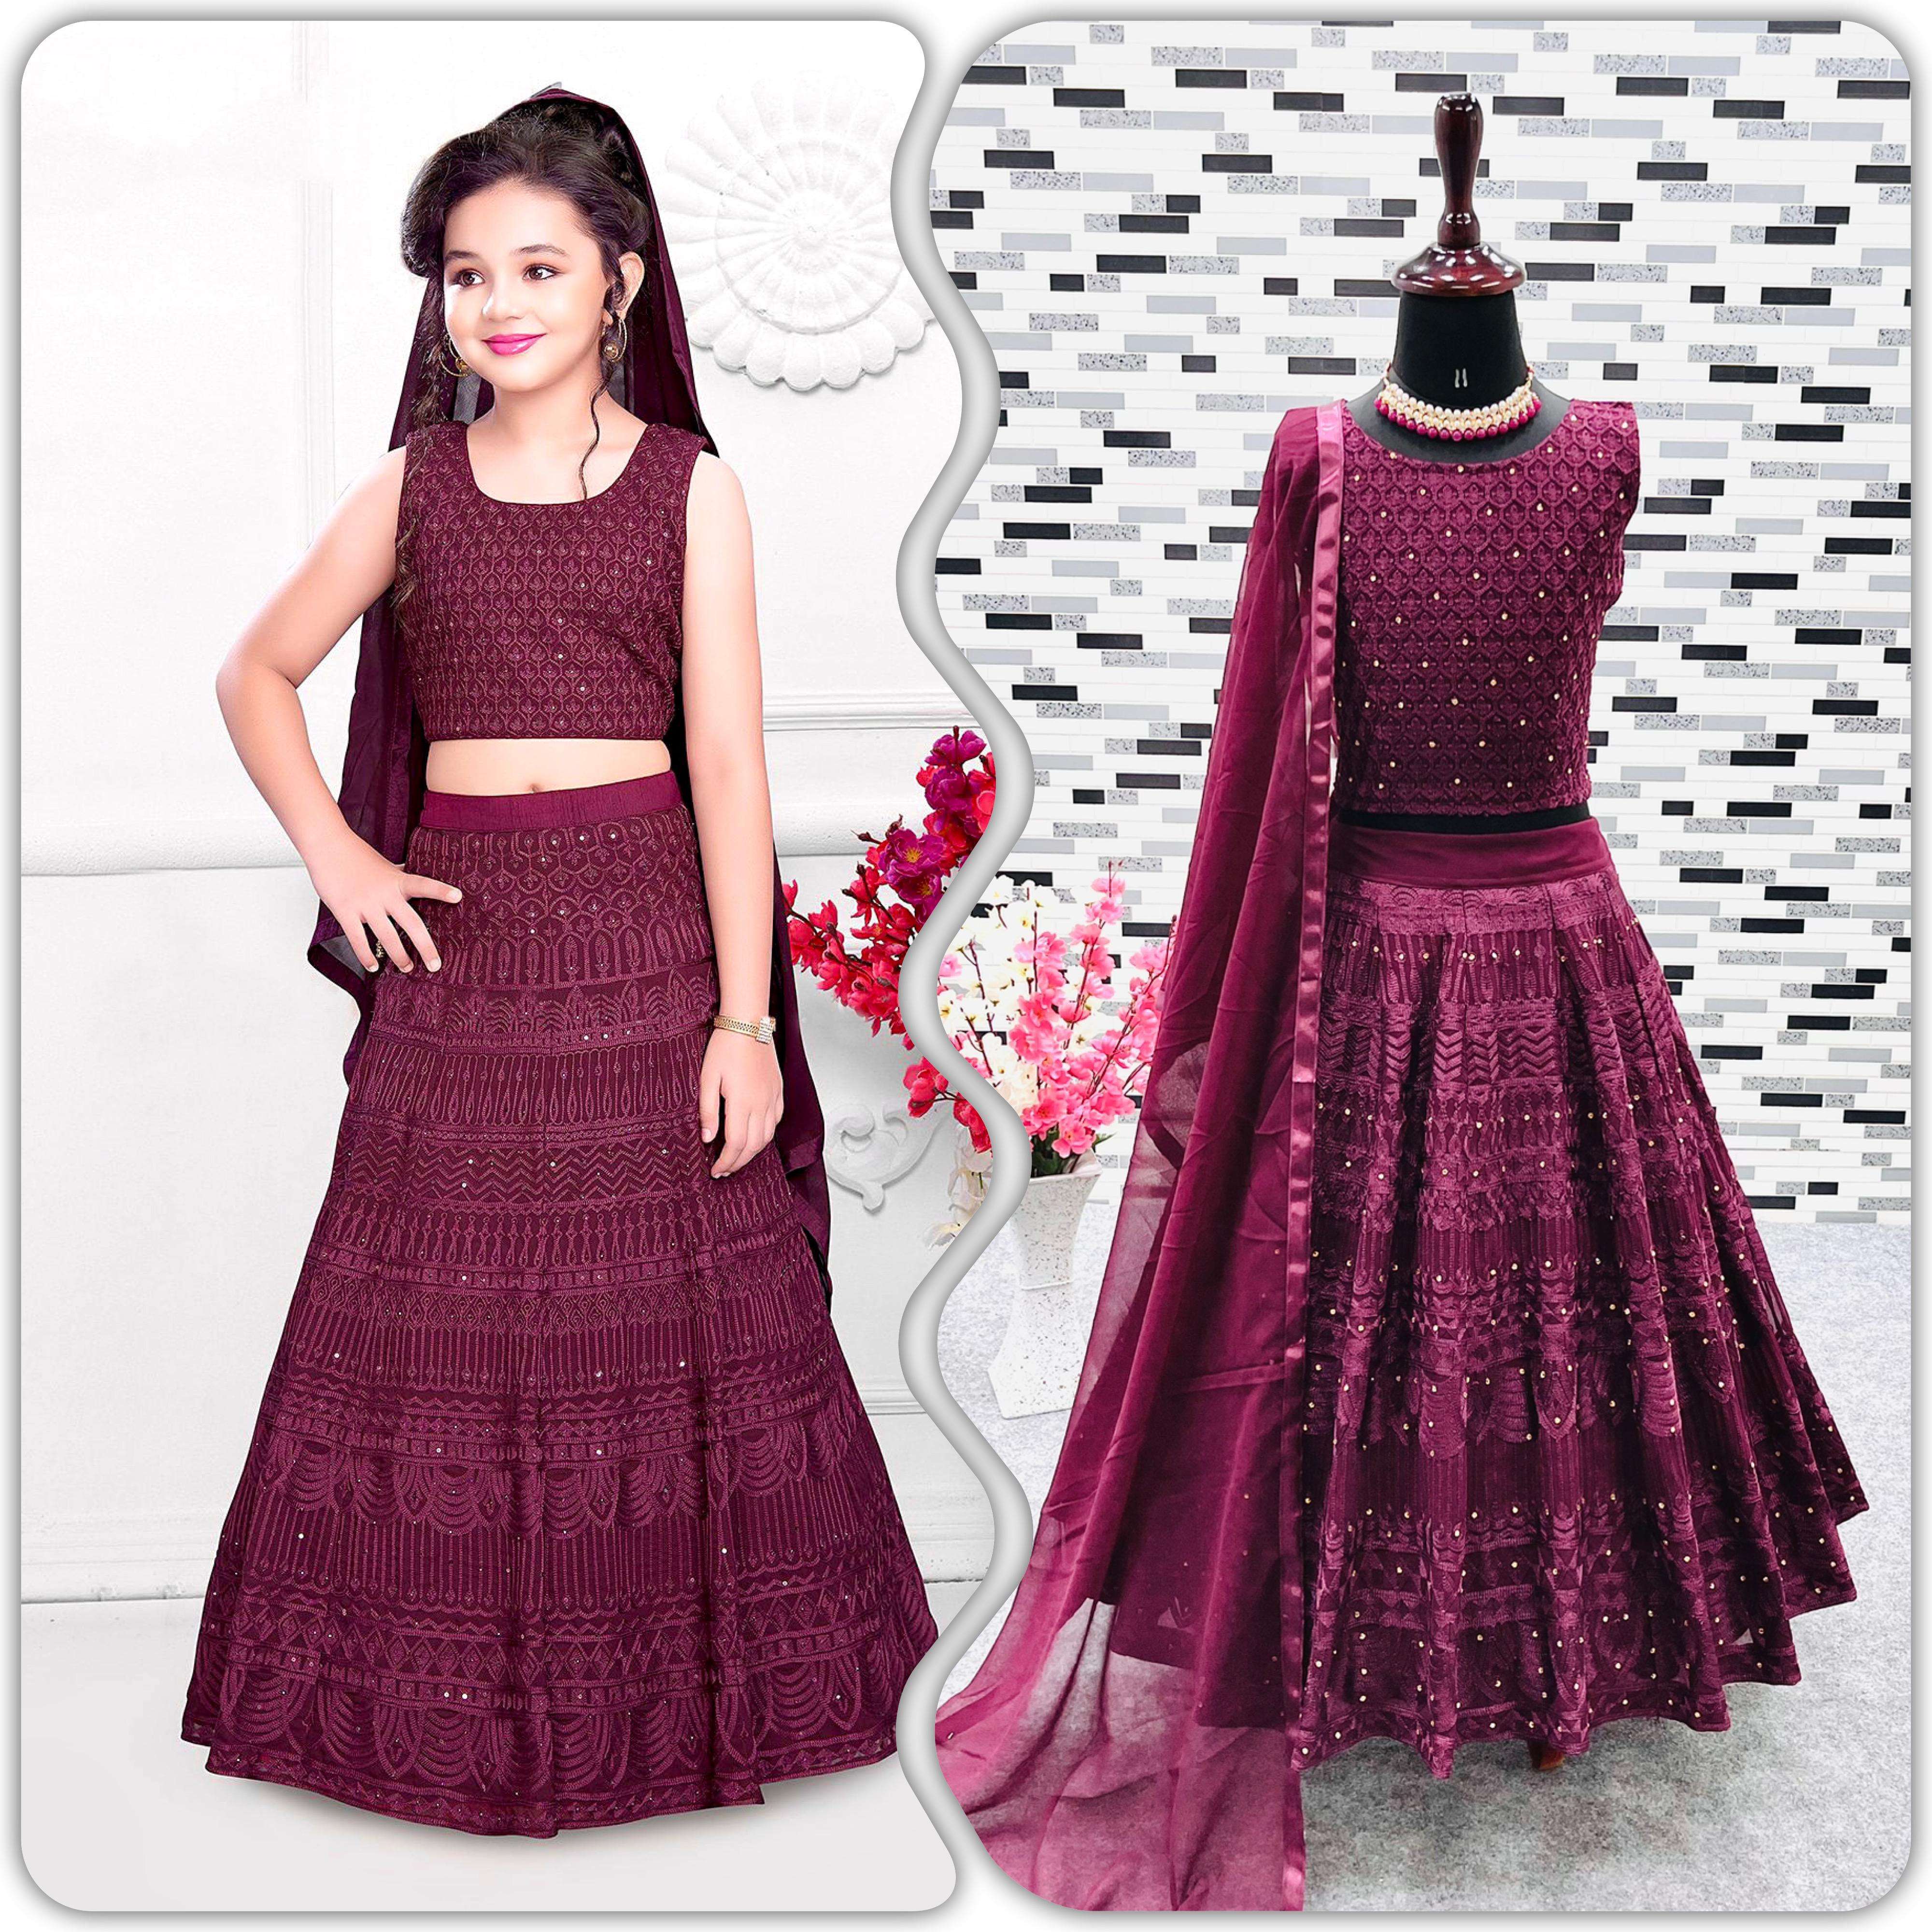 Clothes Shop Girls Embroidered Traditional Lehenga Choli_(Comfortable To 3-15  Years Girls)Free Size.